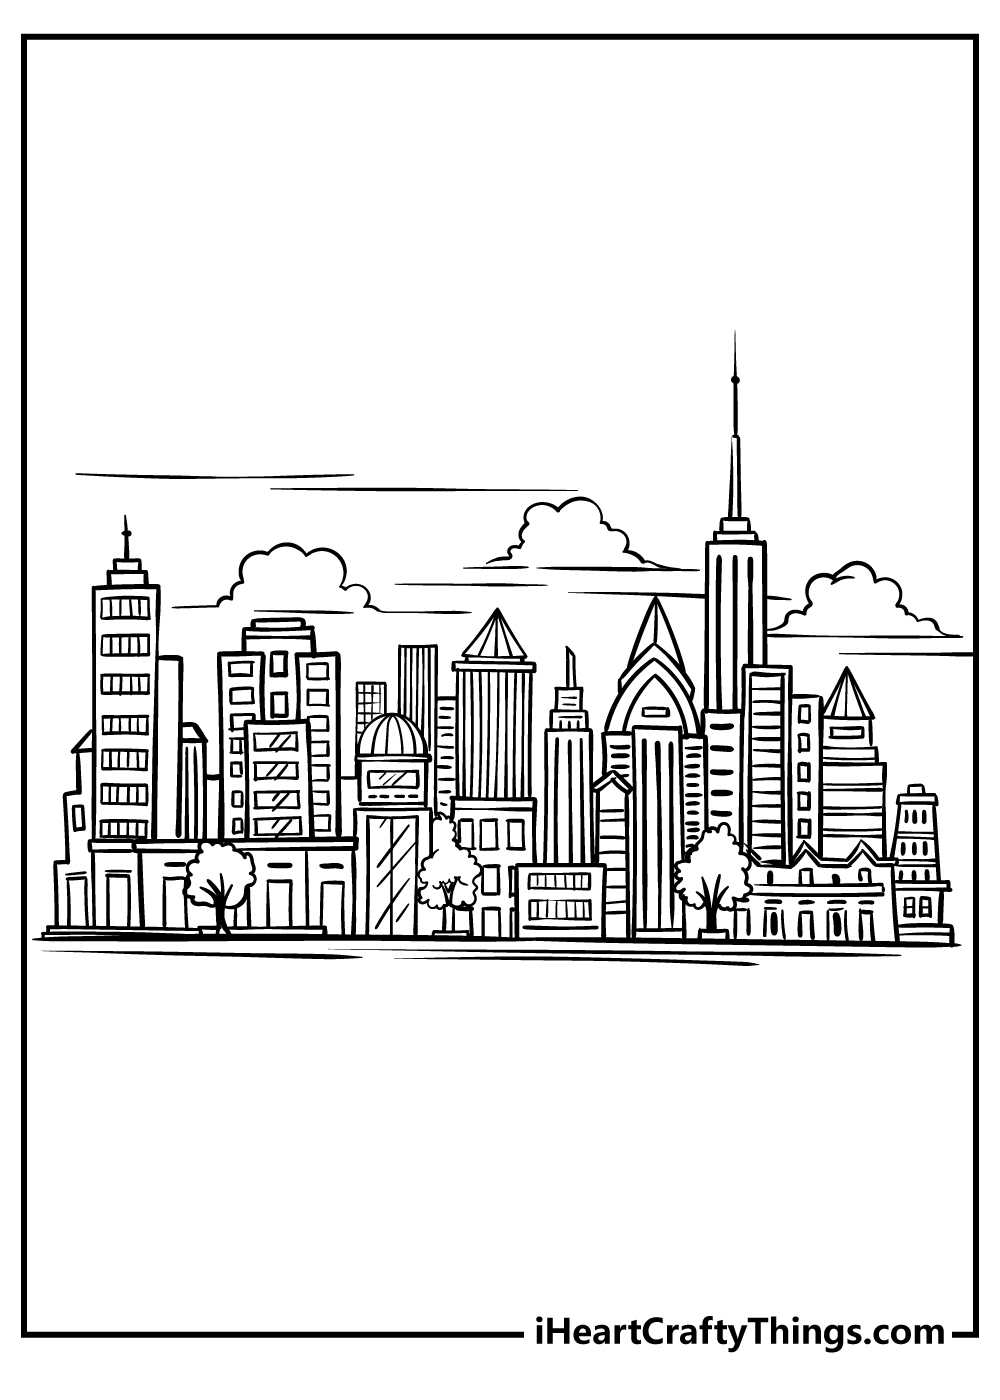 Metropolis Coloring Book for adults free download